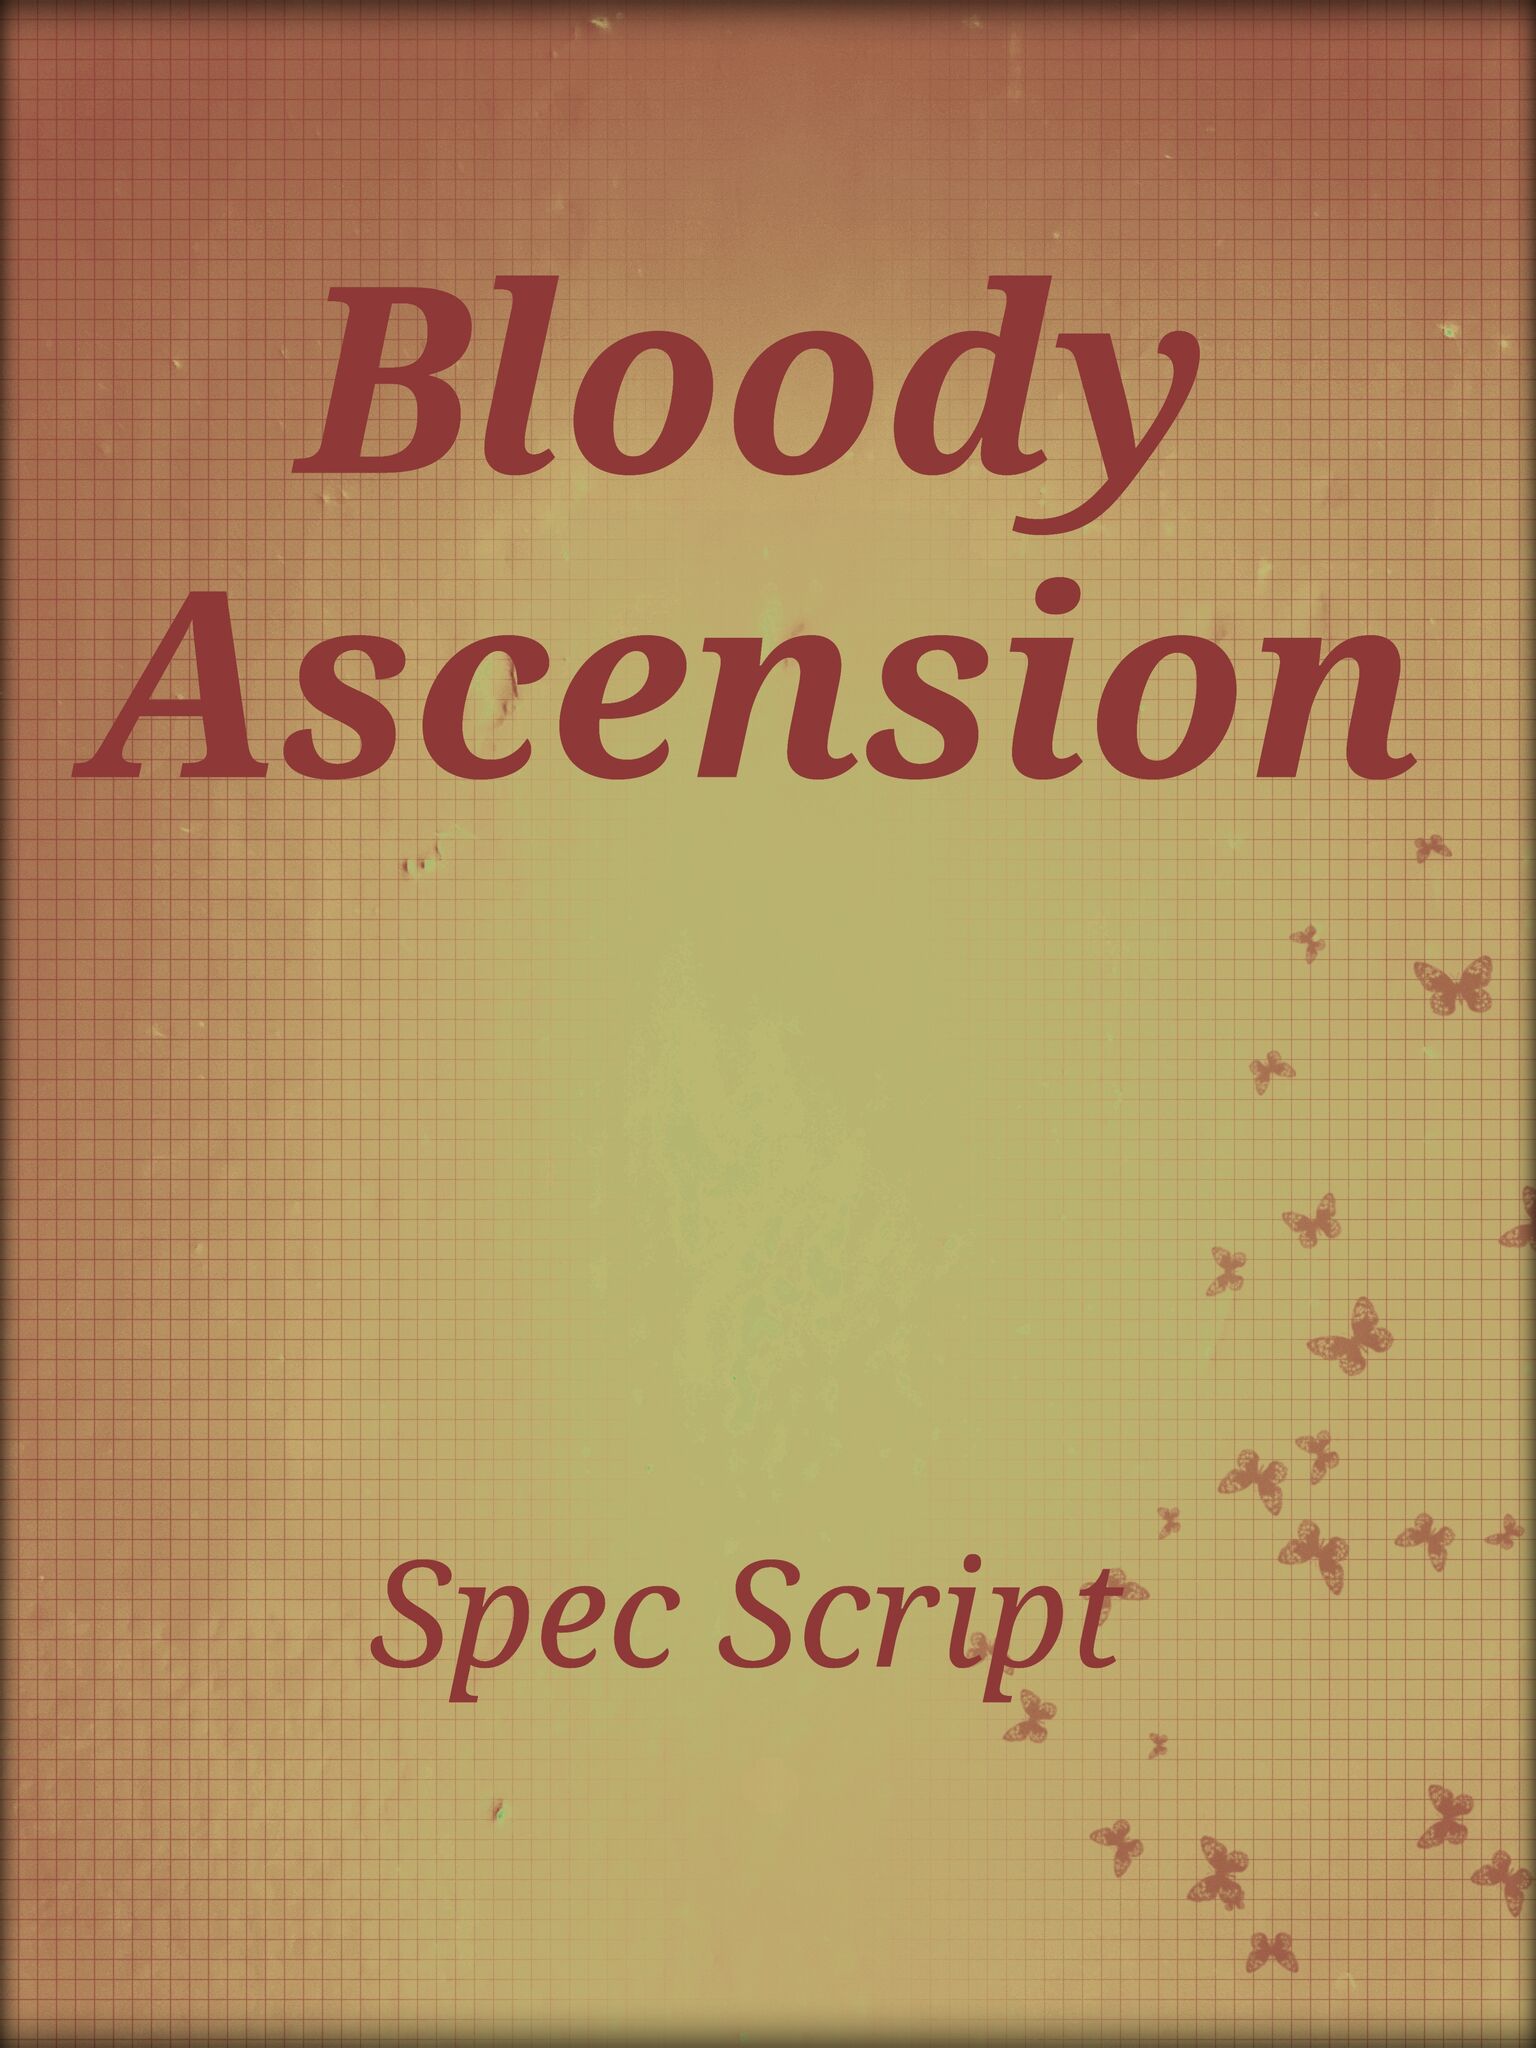 BLOODY ASCENSION